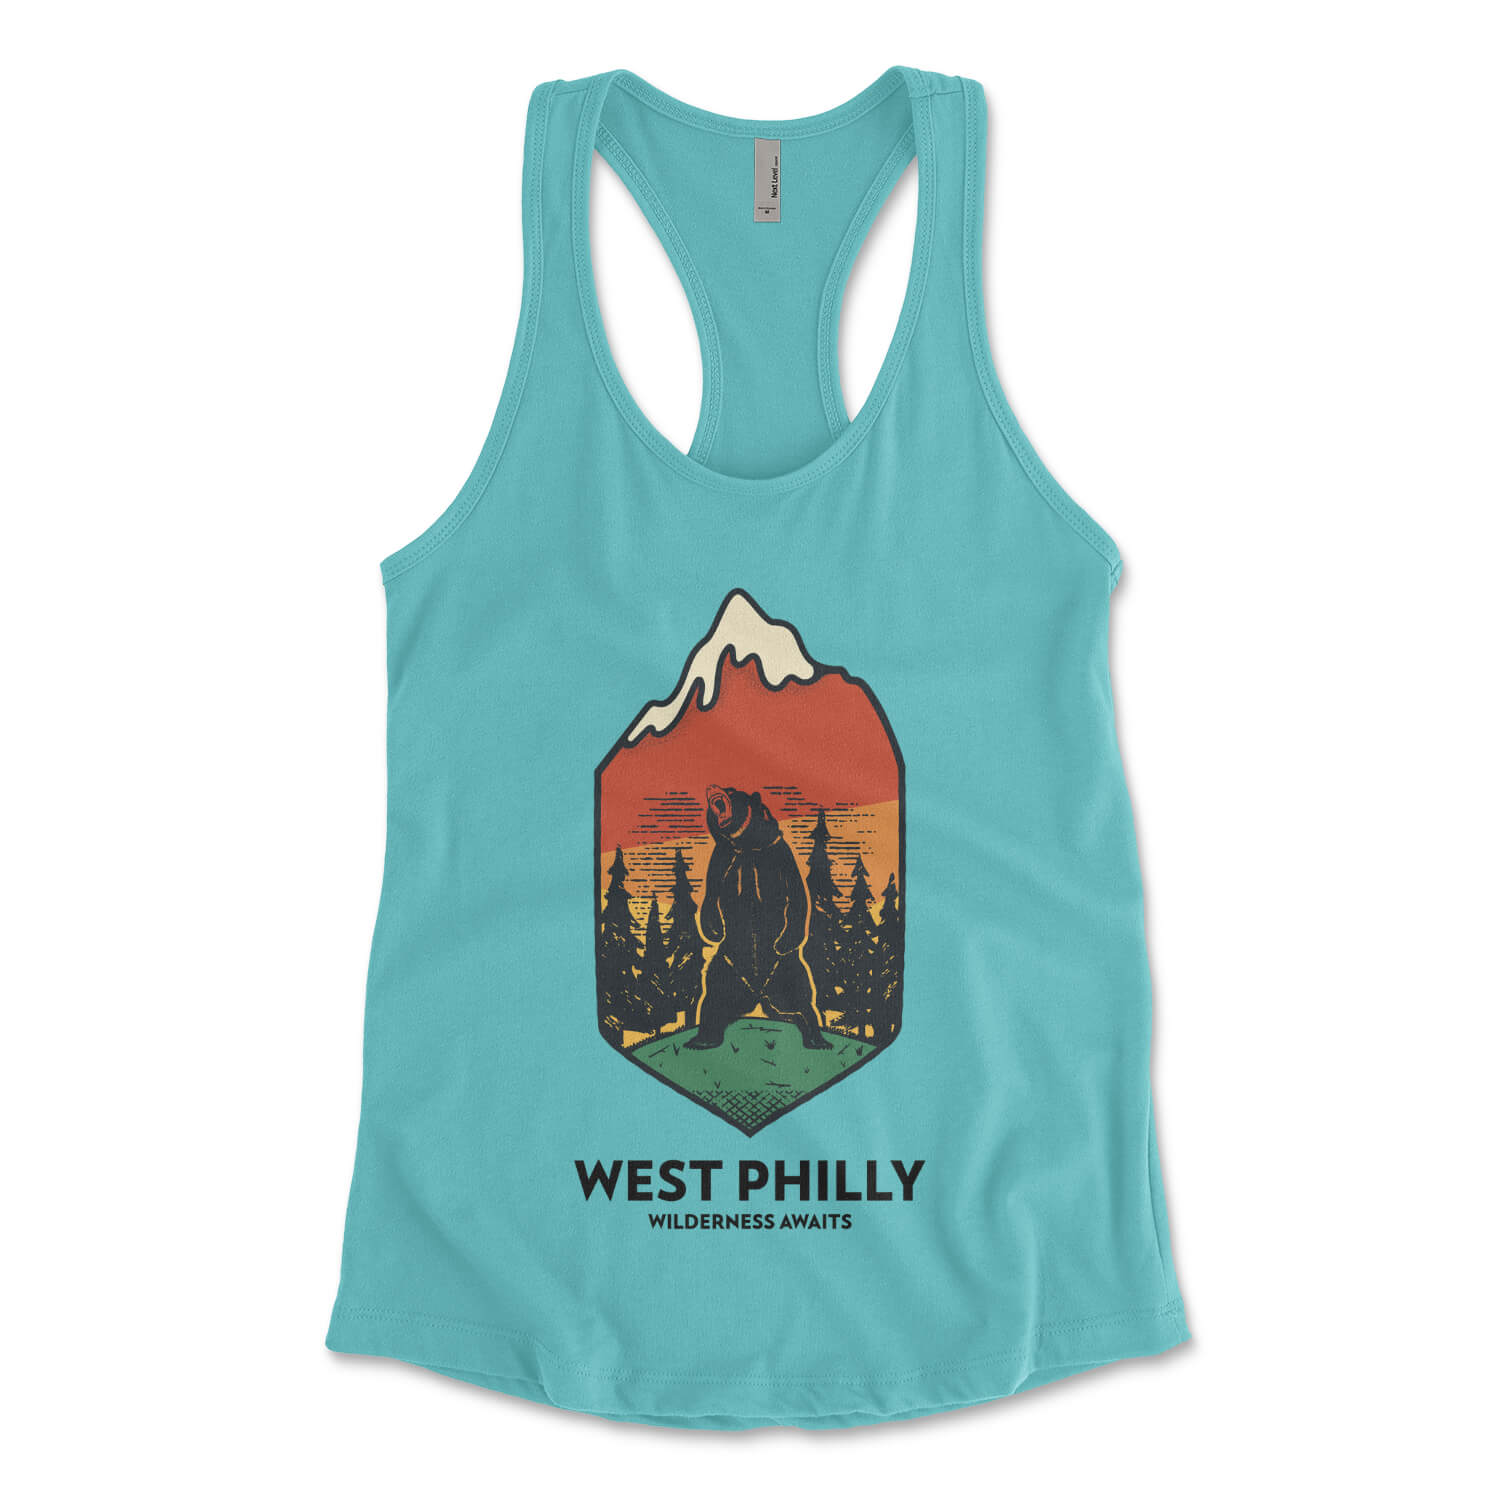 West Philadelphia wilderness awaits bear in the west philly wild on a womens tahiti blue racerback tank top from Phillygoat